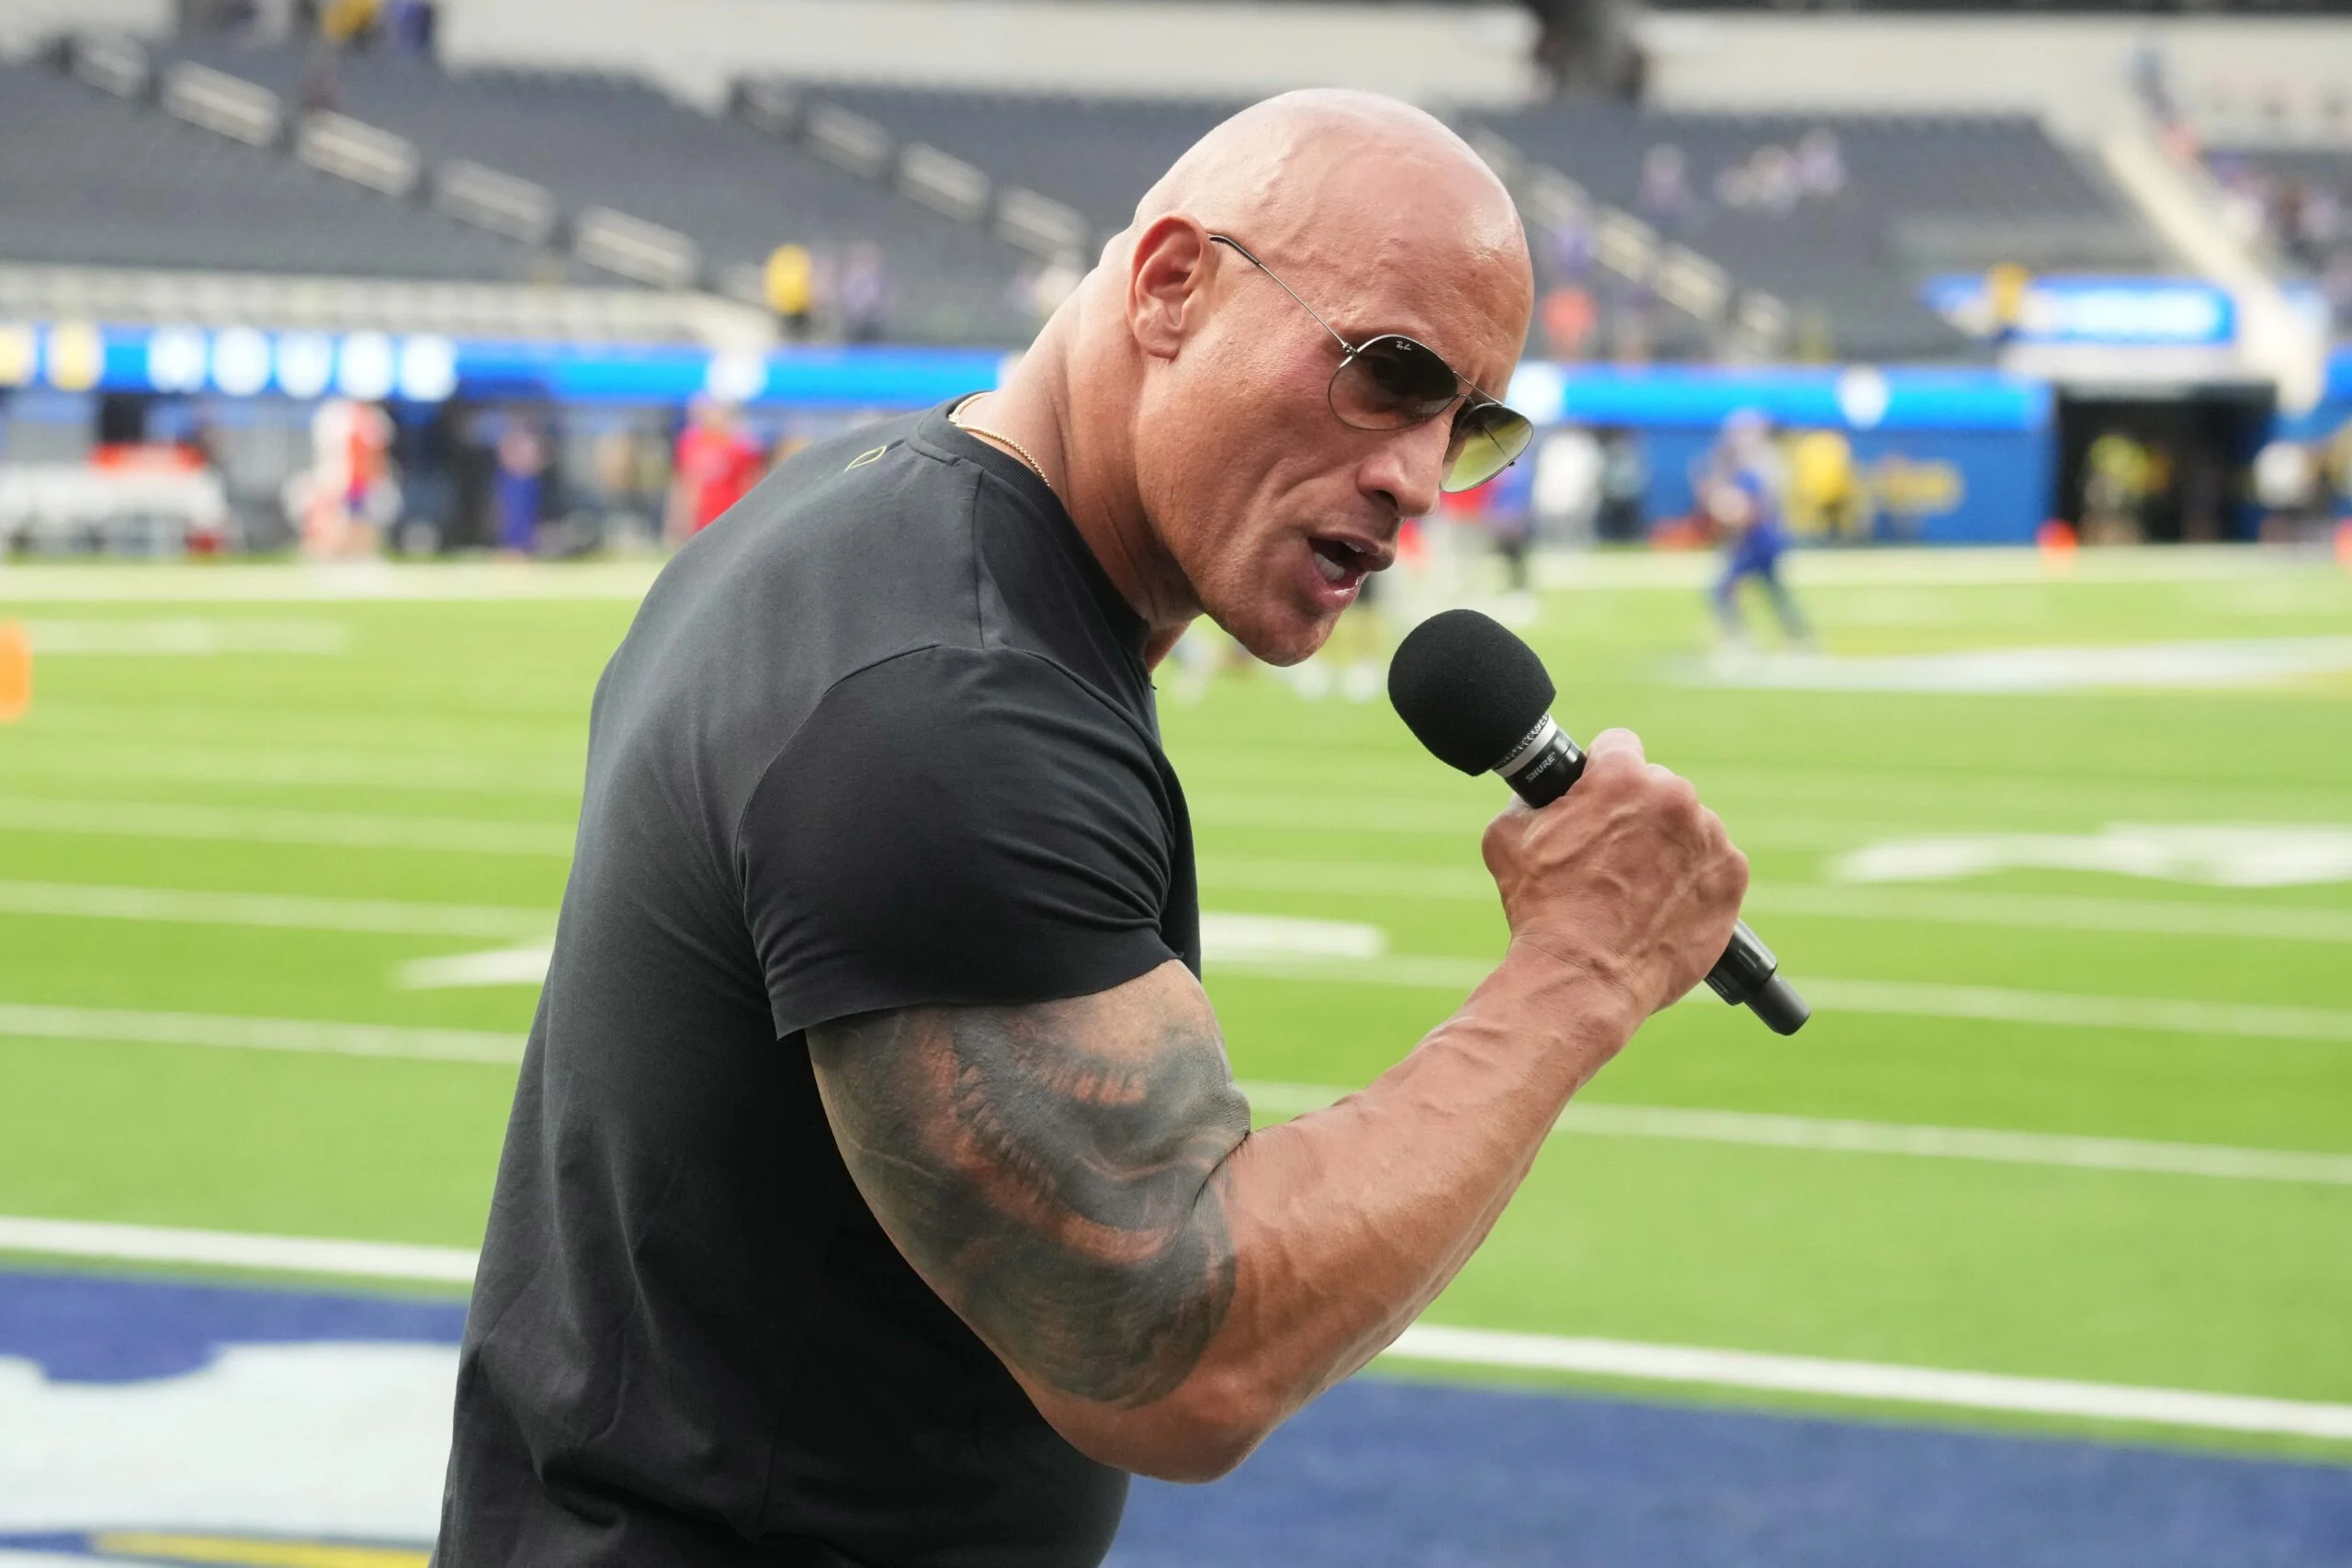 XFL was acquired by Dwayne Johnson’s Alpha Acquico